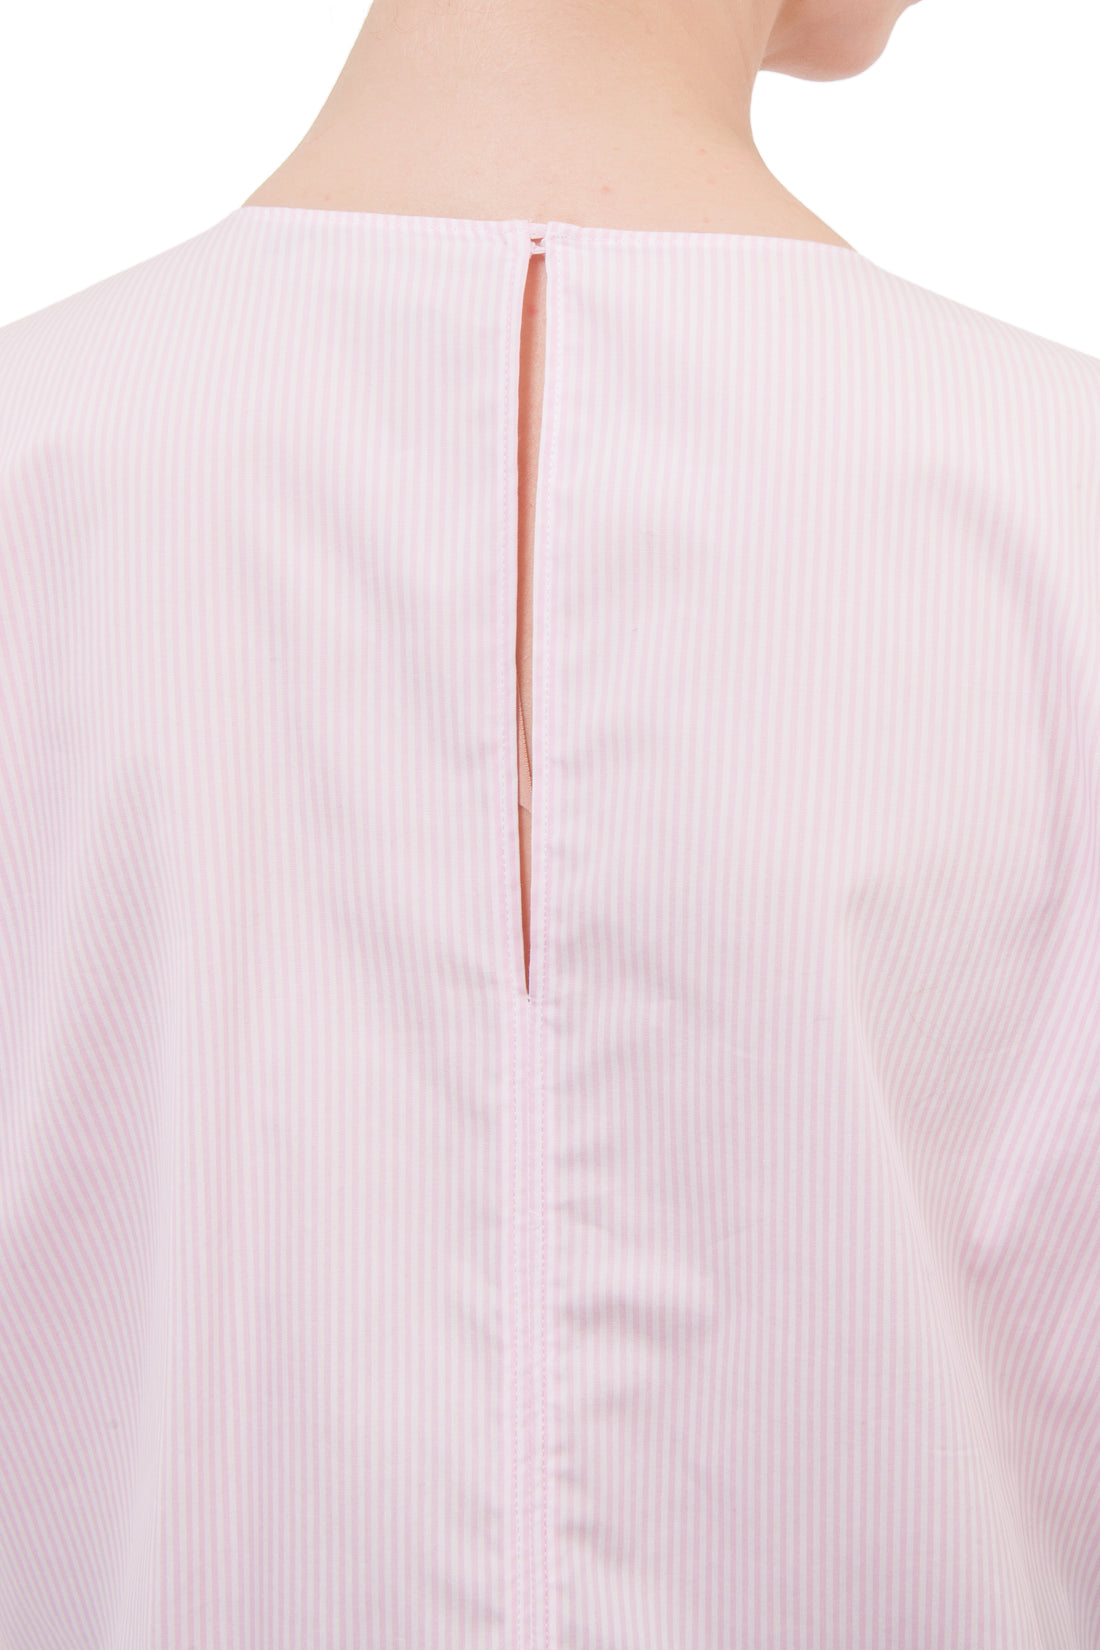 No. 21 Pink Striped Layered Shirt with Black Glass Bead Design